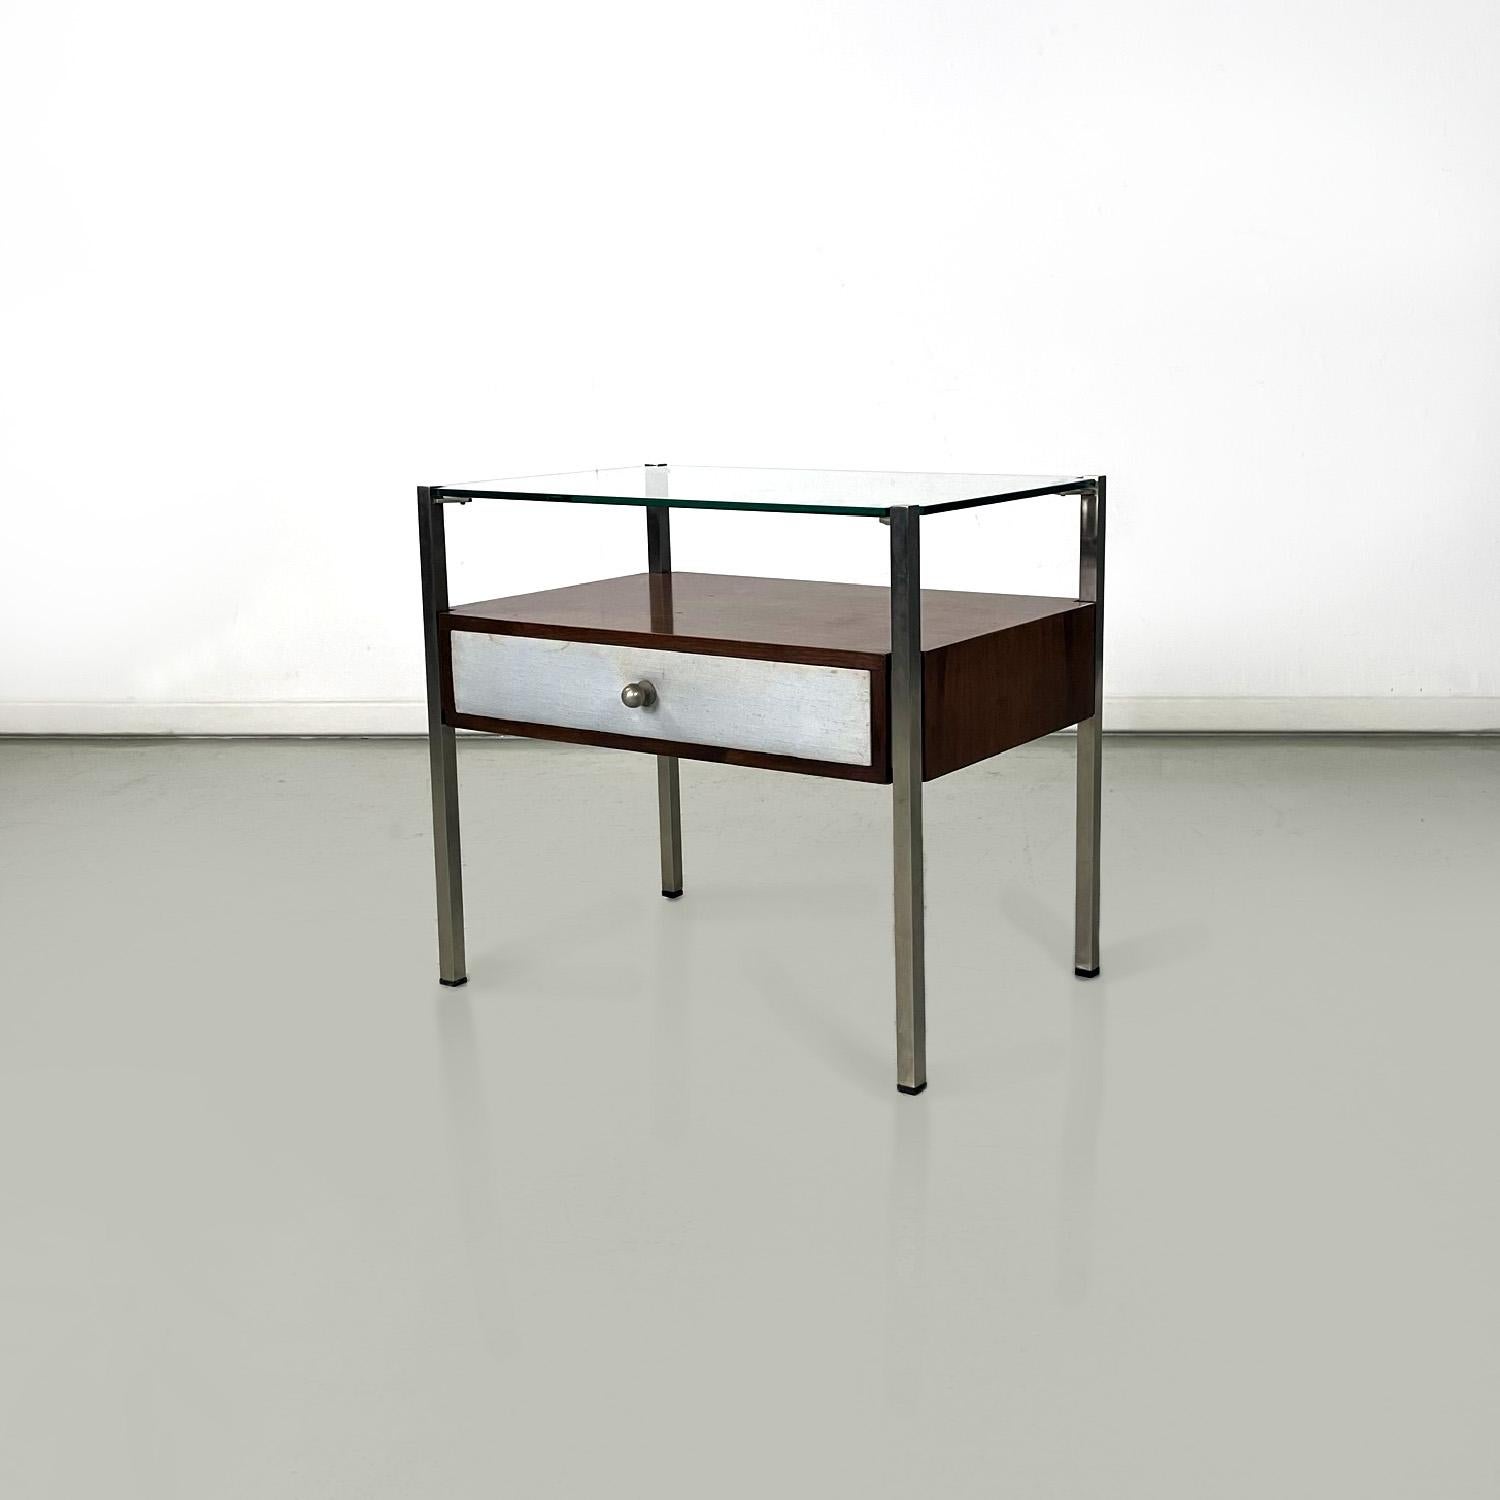 Modern Italian modern glass metal wood and light blue fabric bedside tables, 1970s For Sale